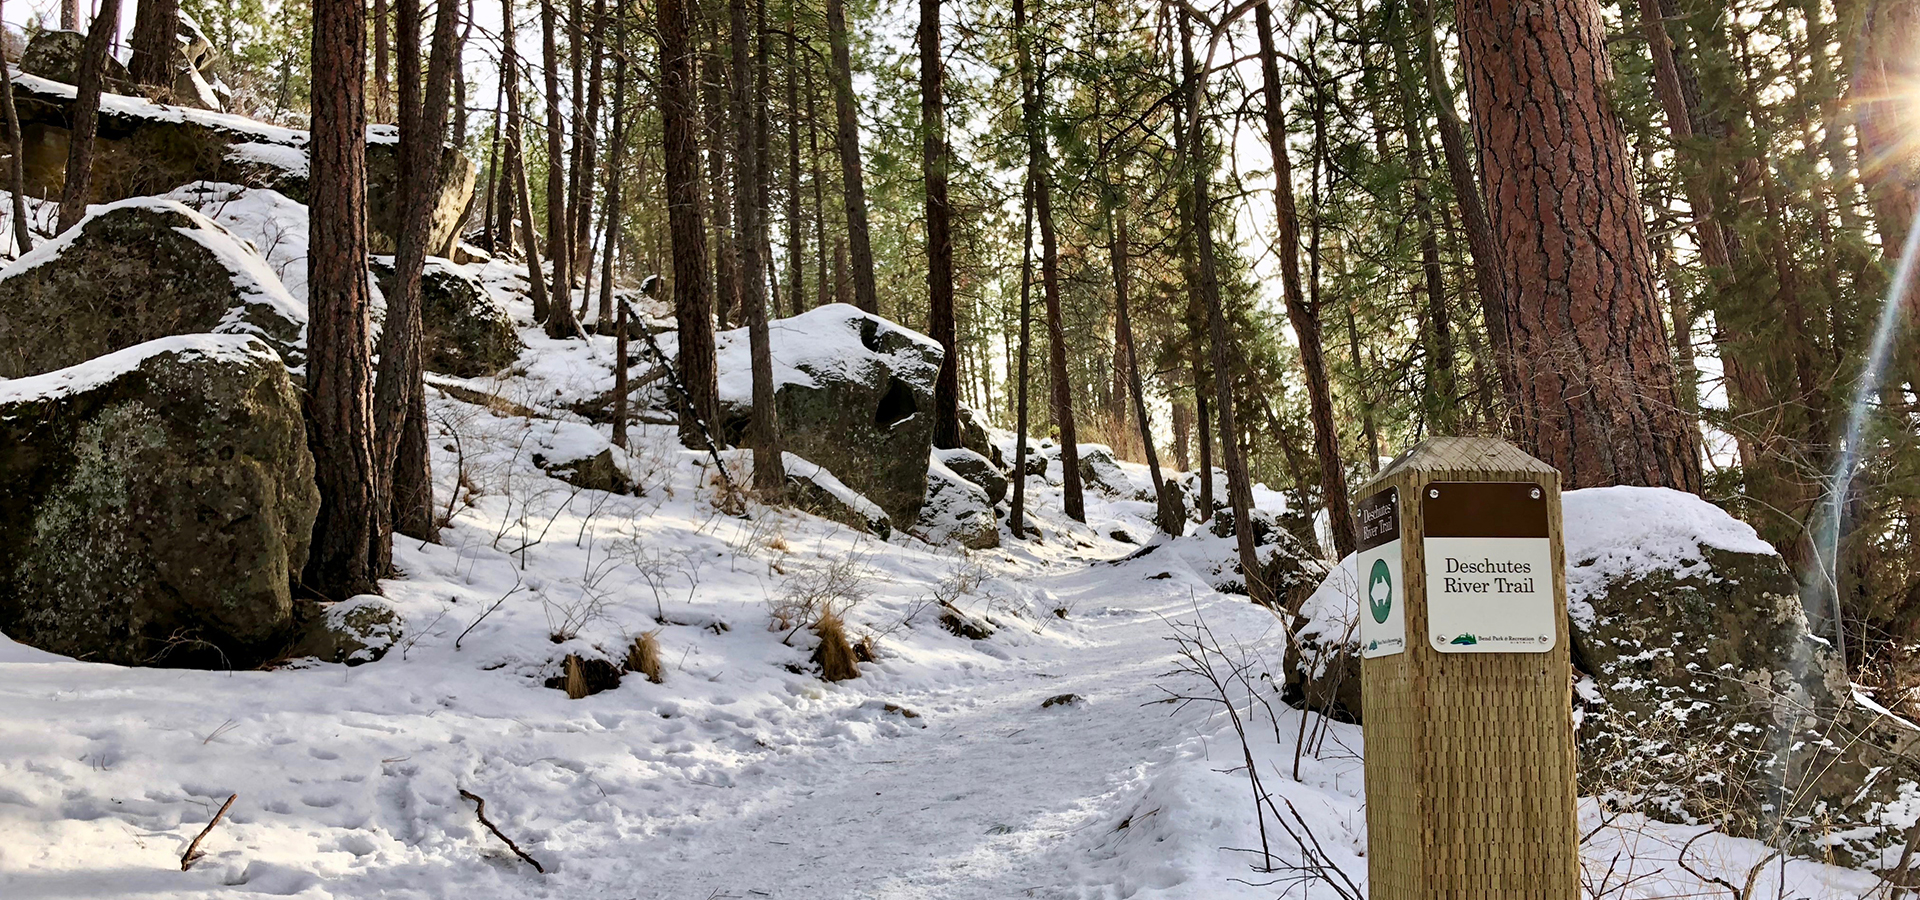 A snowy Deschutes River Trail and sign.